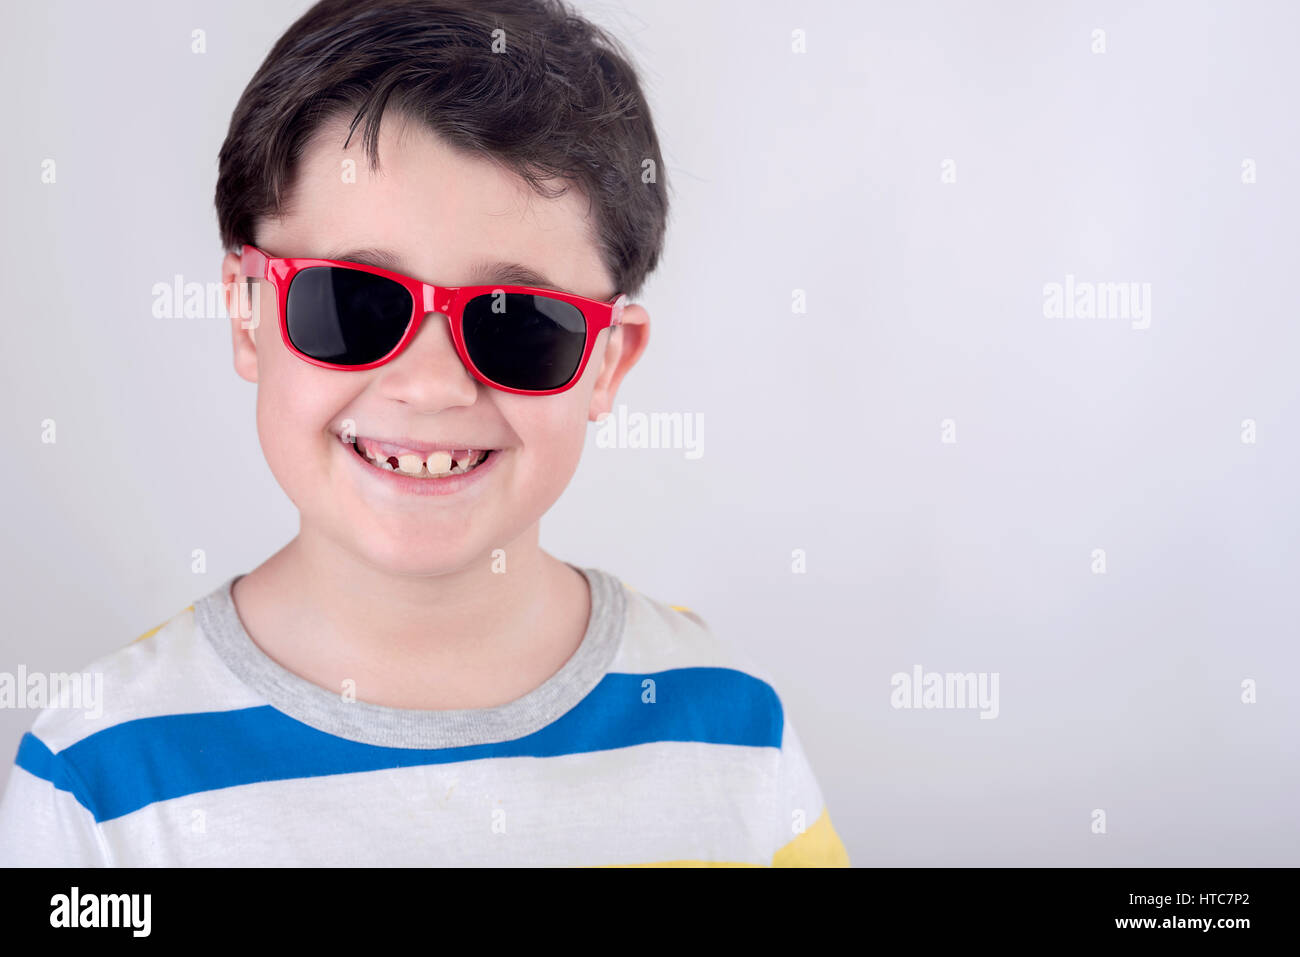 Smiling boy with sunglasses Stock Photo